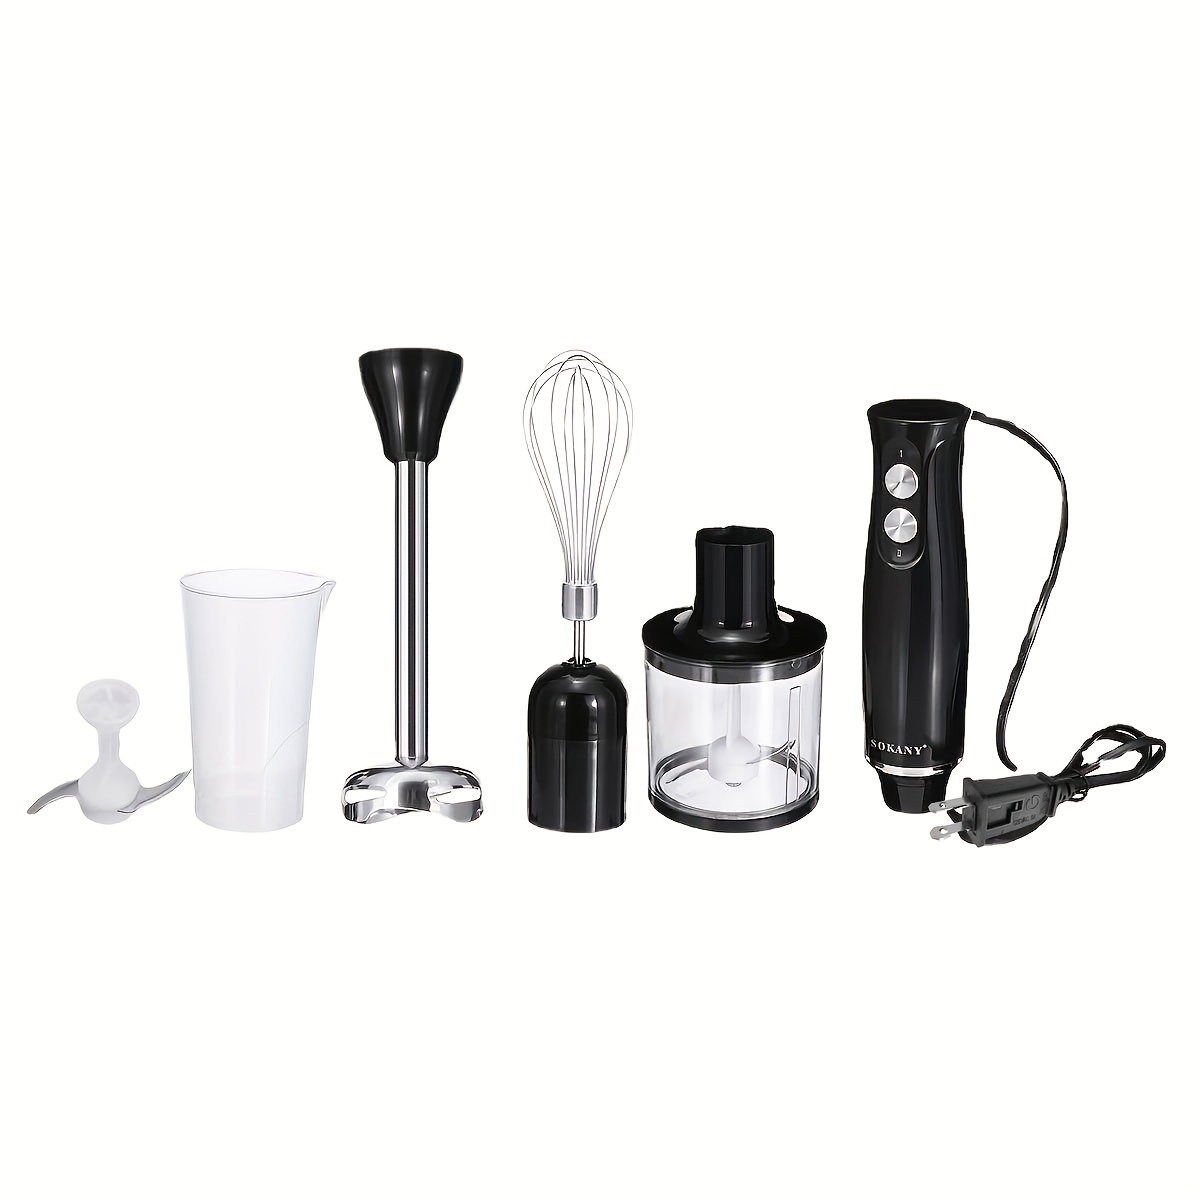 KOIOS 1100W Immersion Hand Blender, Stainless Steel Stick Blender with  12-Speed & Turbo Mode, 5-in1 Handheld Blender with 600ml Mixing Beaker with  Lid,500ml Chopper, Whisk, Milk Frother, Perfect for Soup, Smoothies, Puree